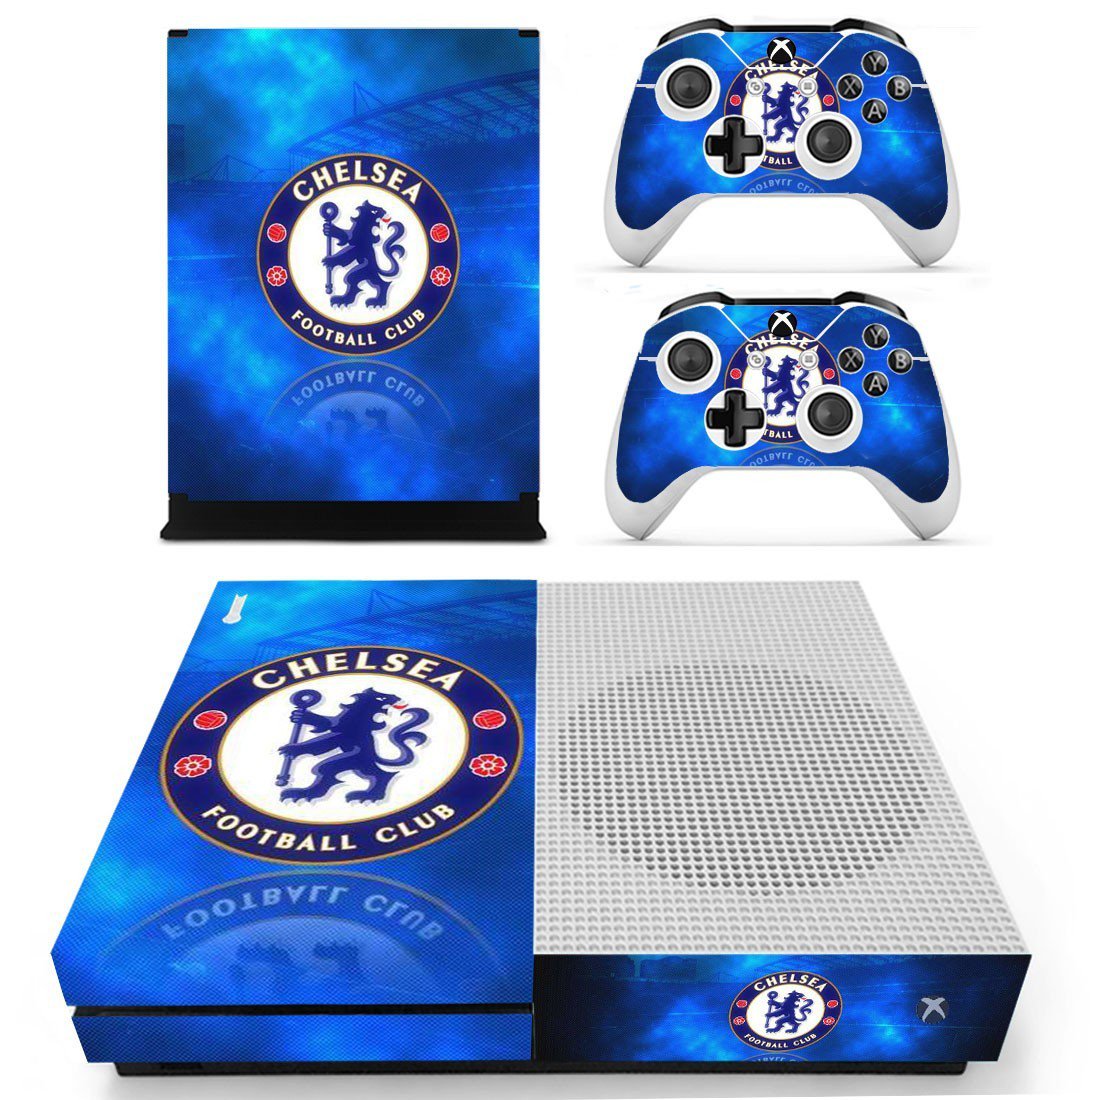 Chelsea FC Sticker For Xbox One S And Controllers